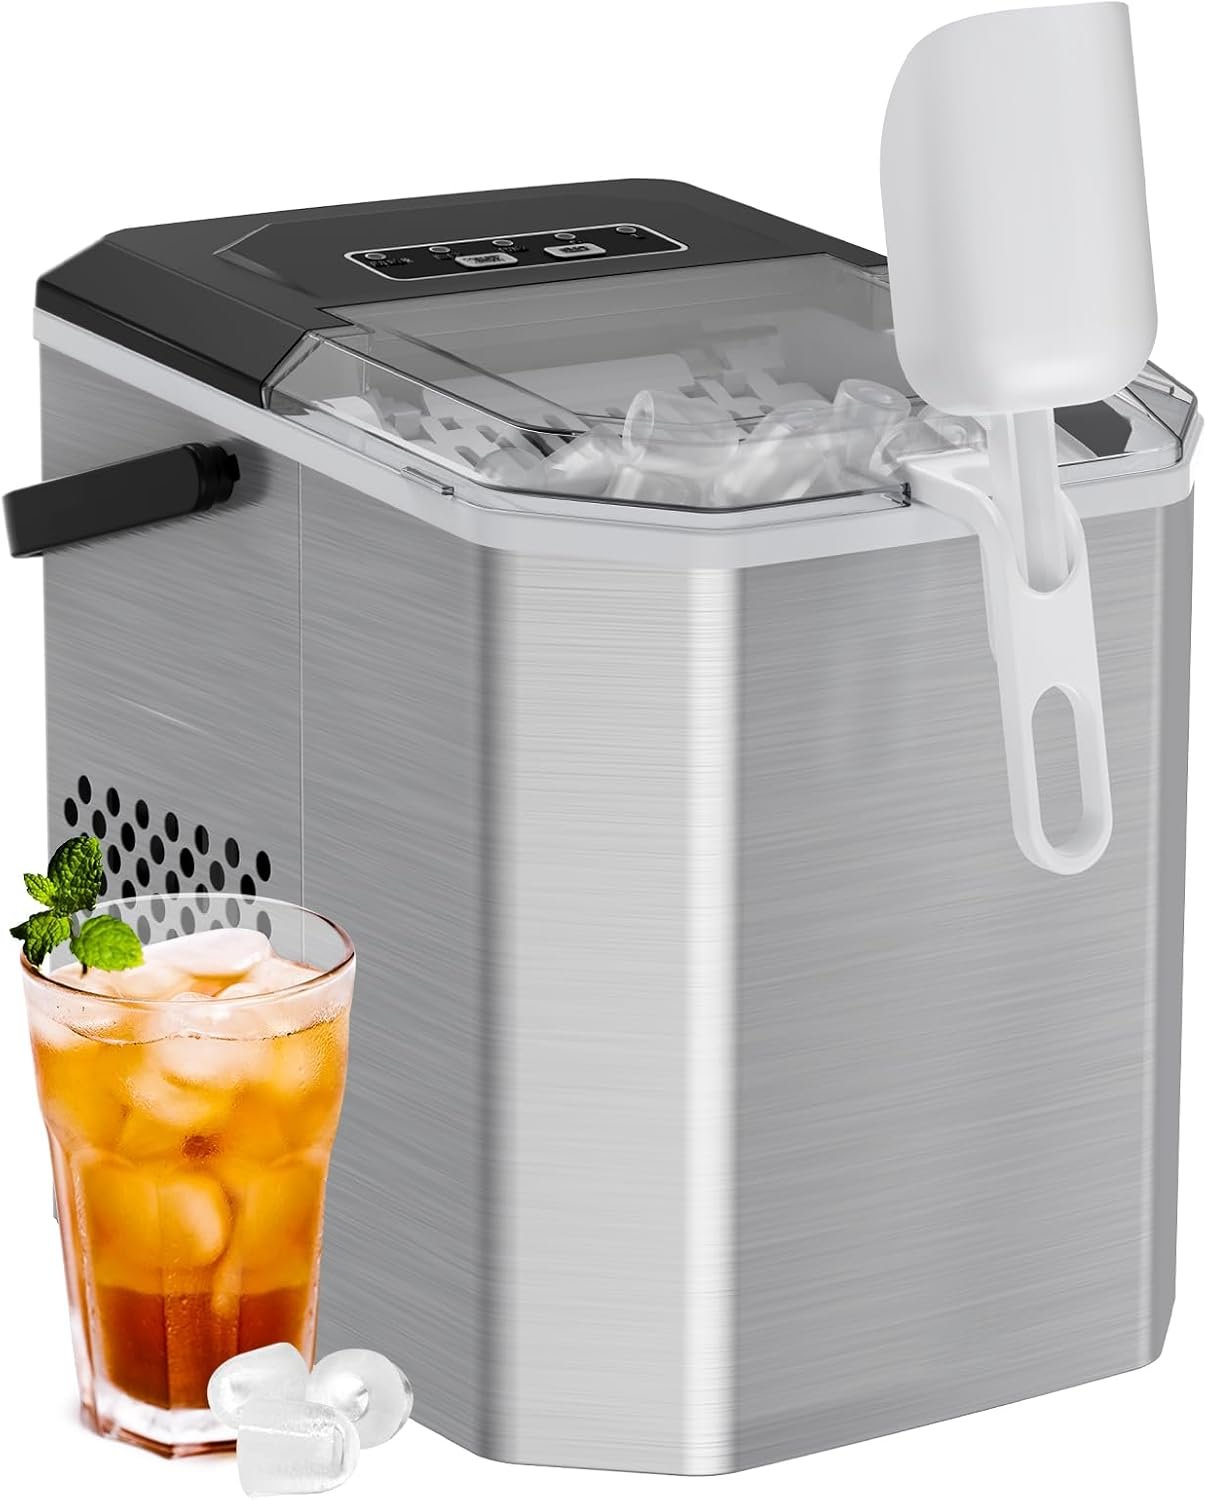 Stainless Steel Ice Machine Review